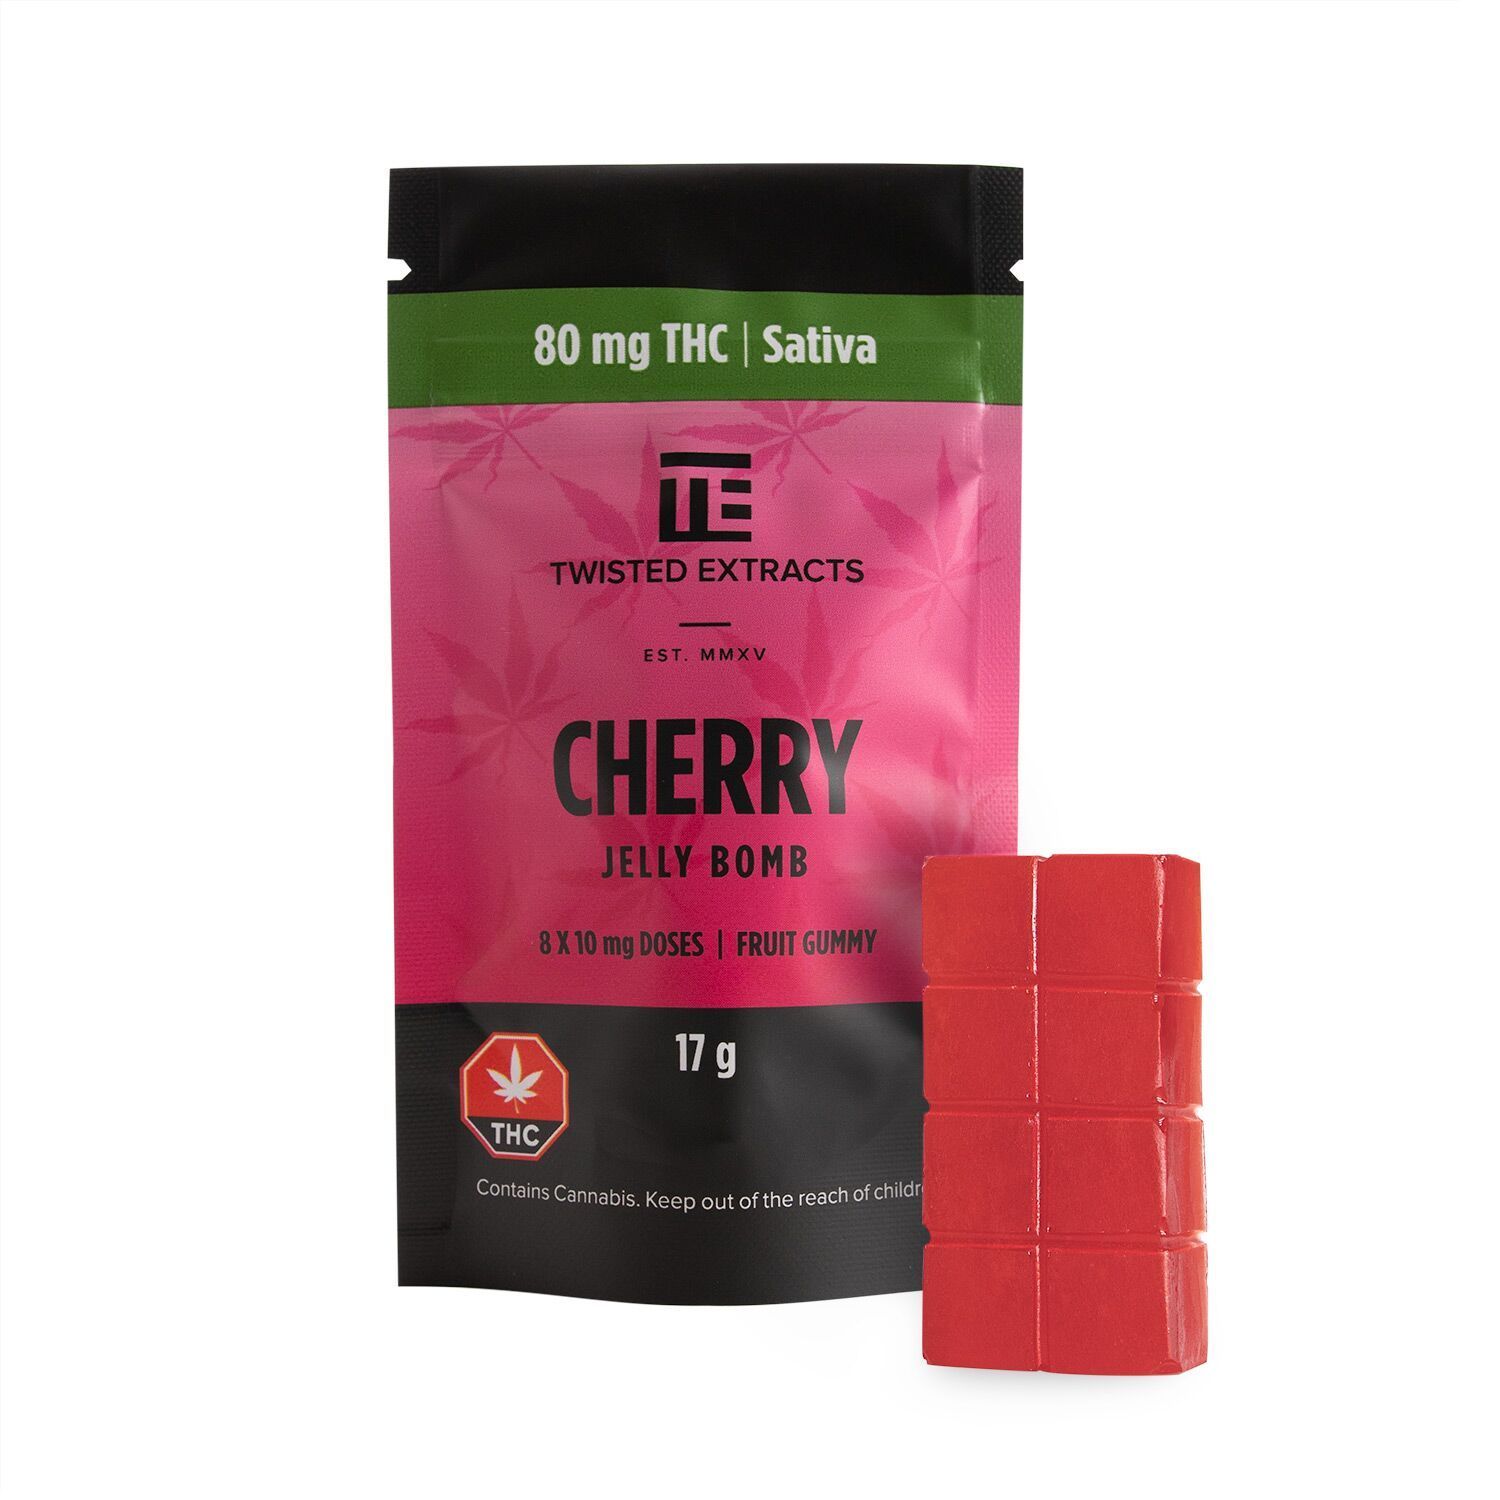 Twisted Extracts Jelly Bomb - Cherry Sativa 80mg